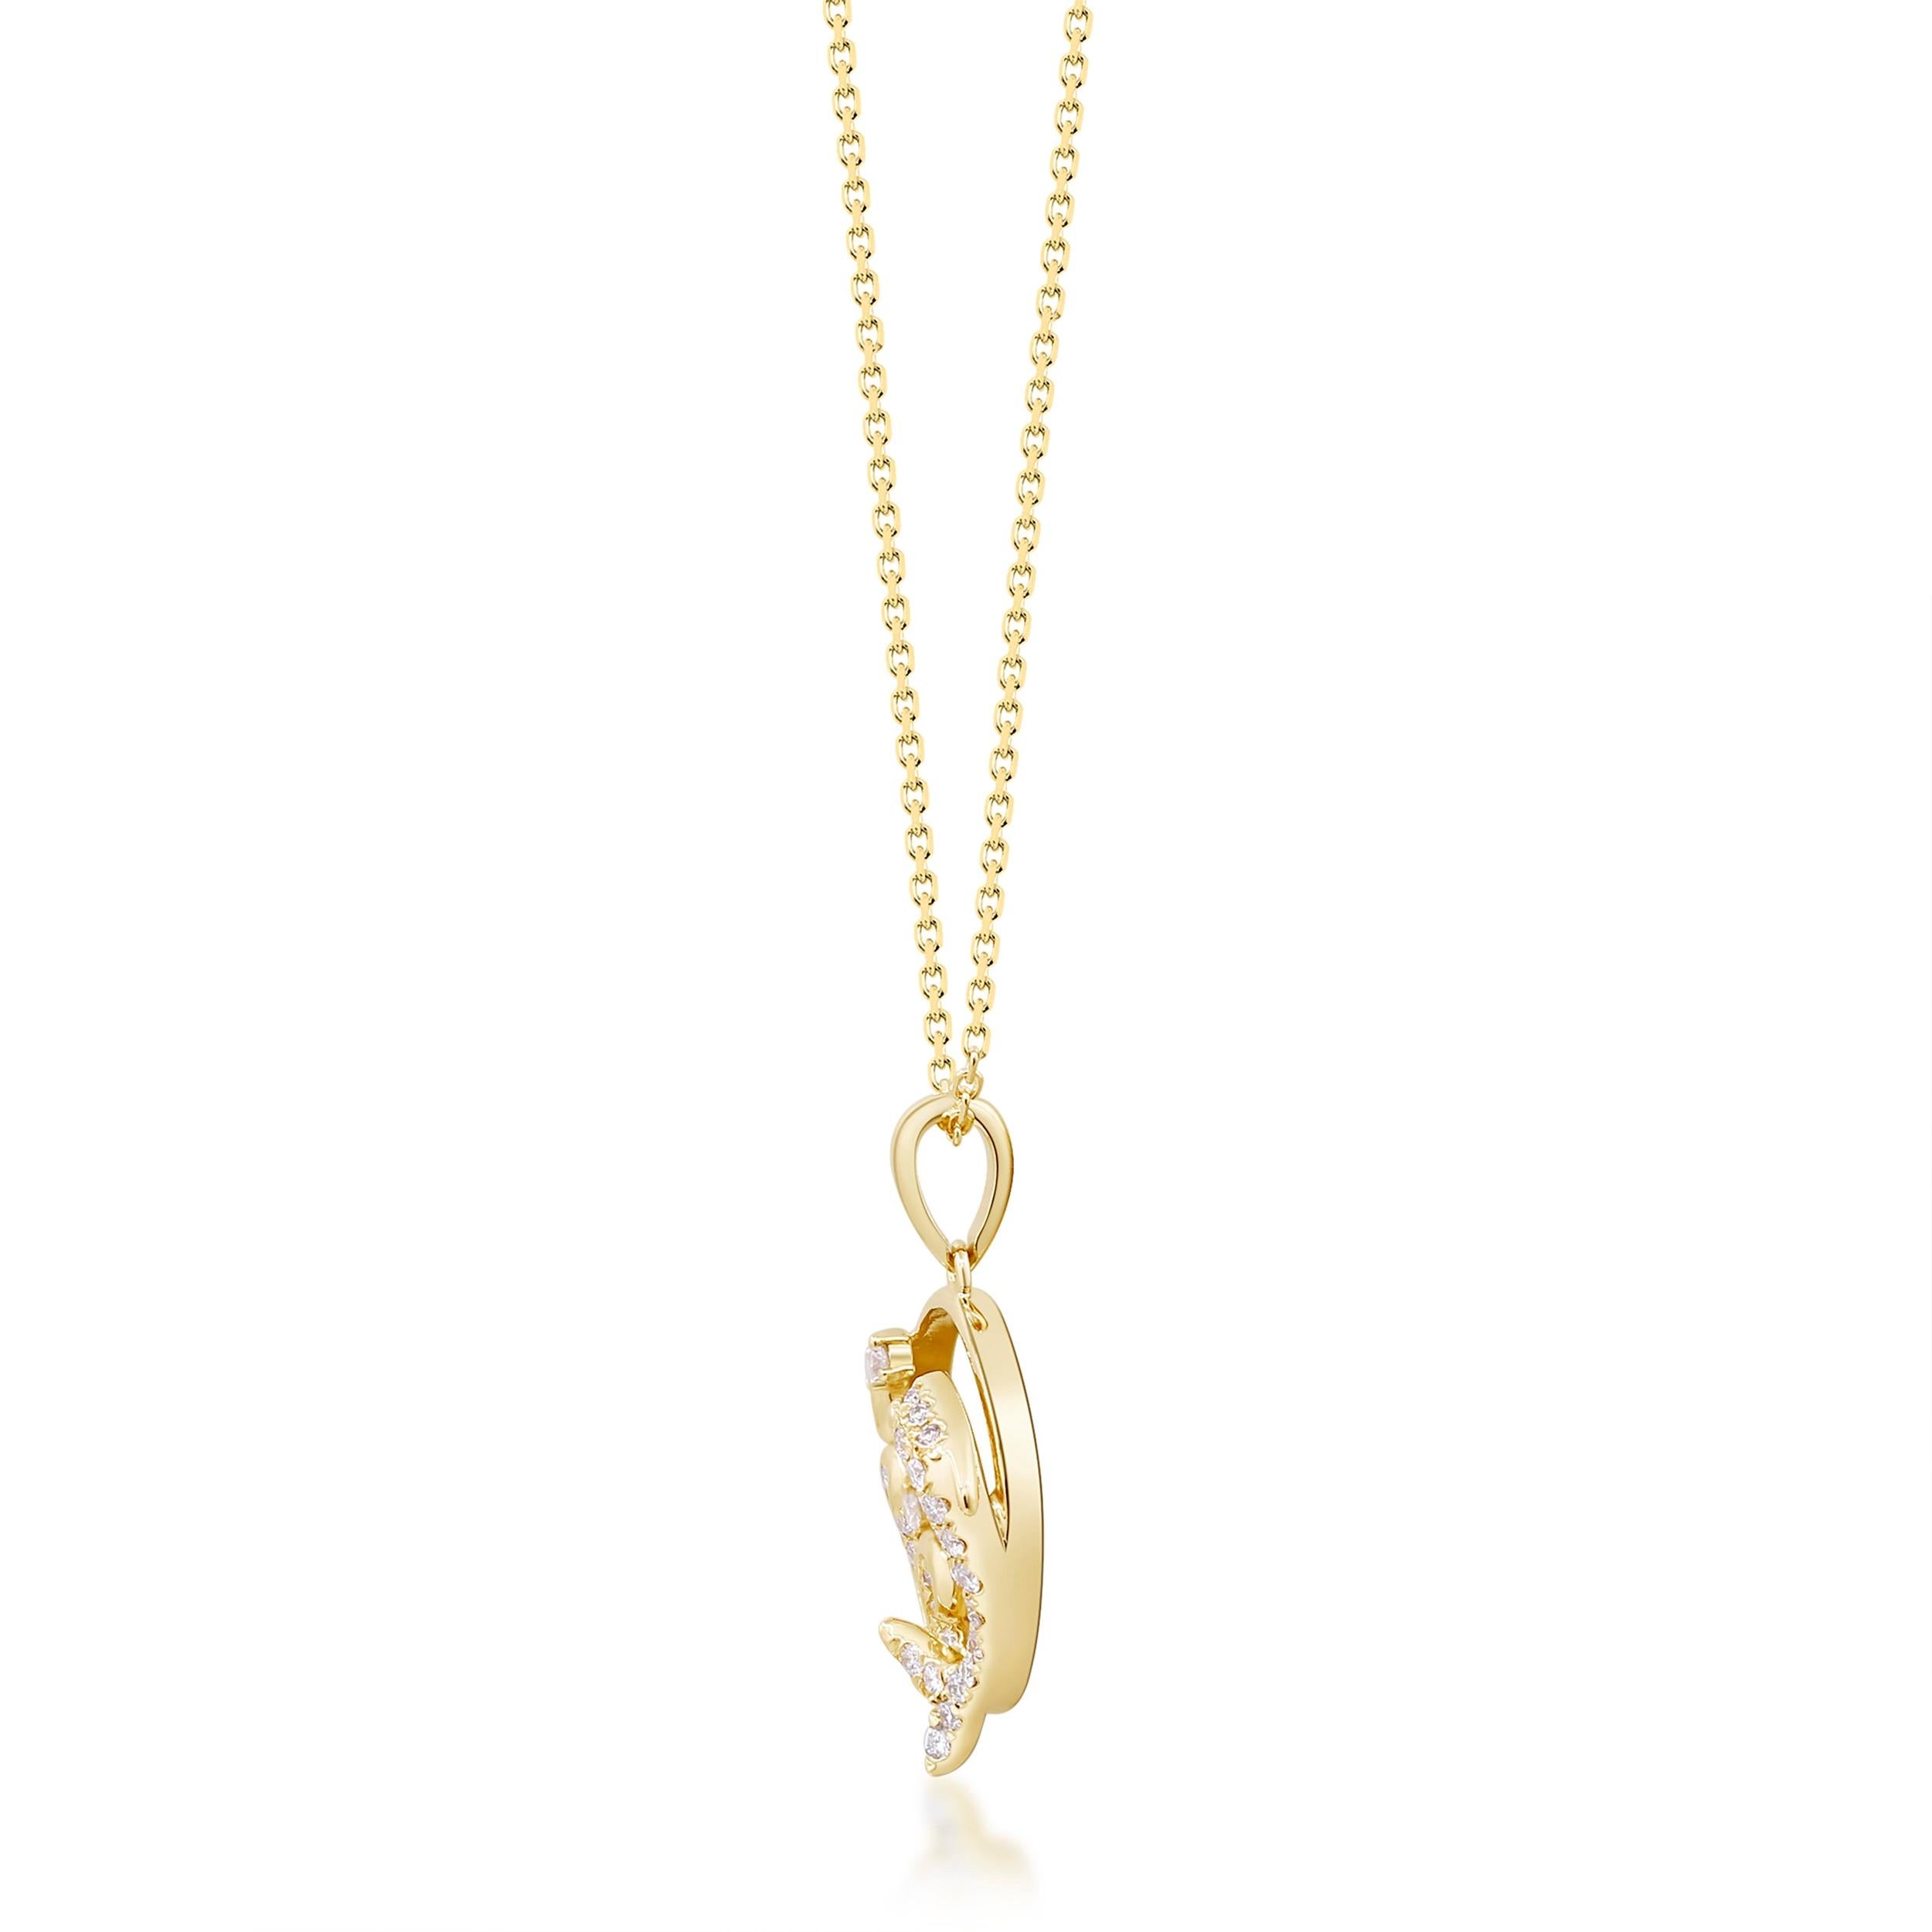 *Glamorous, edgy and dainty Dolphin dancing in waves Necklace features 14K yellow Gold & Diamond Dolphin. It is a precious accessory suitable for both daily and office wear.
* The Smithsonian Jewelry collection which is launched in 2022 in